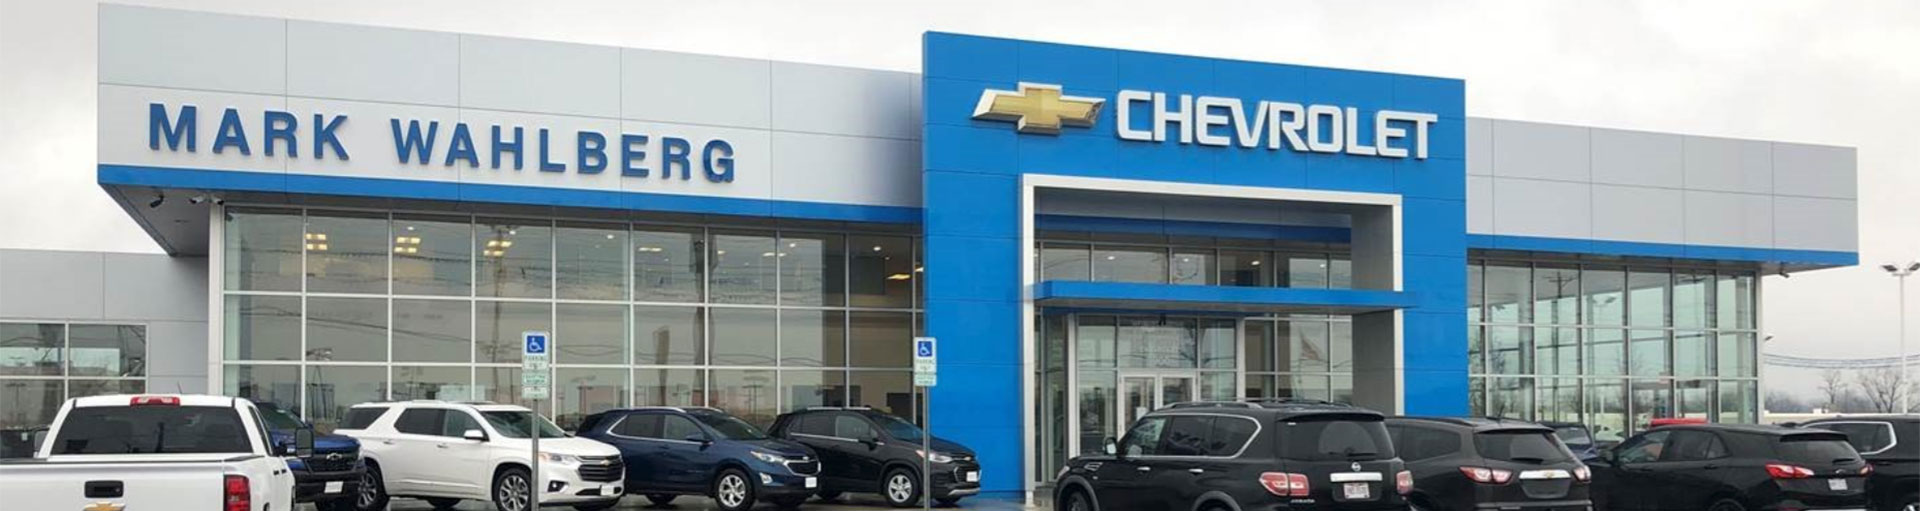 Mark Wahlberg Chevrolet Recommended Maintenance When Driving Less